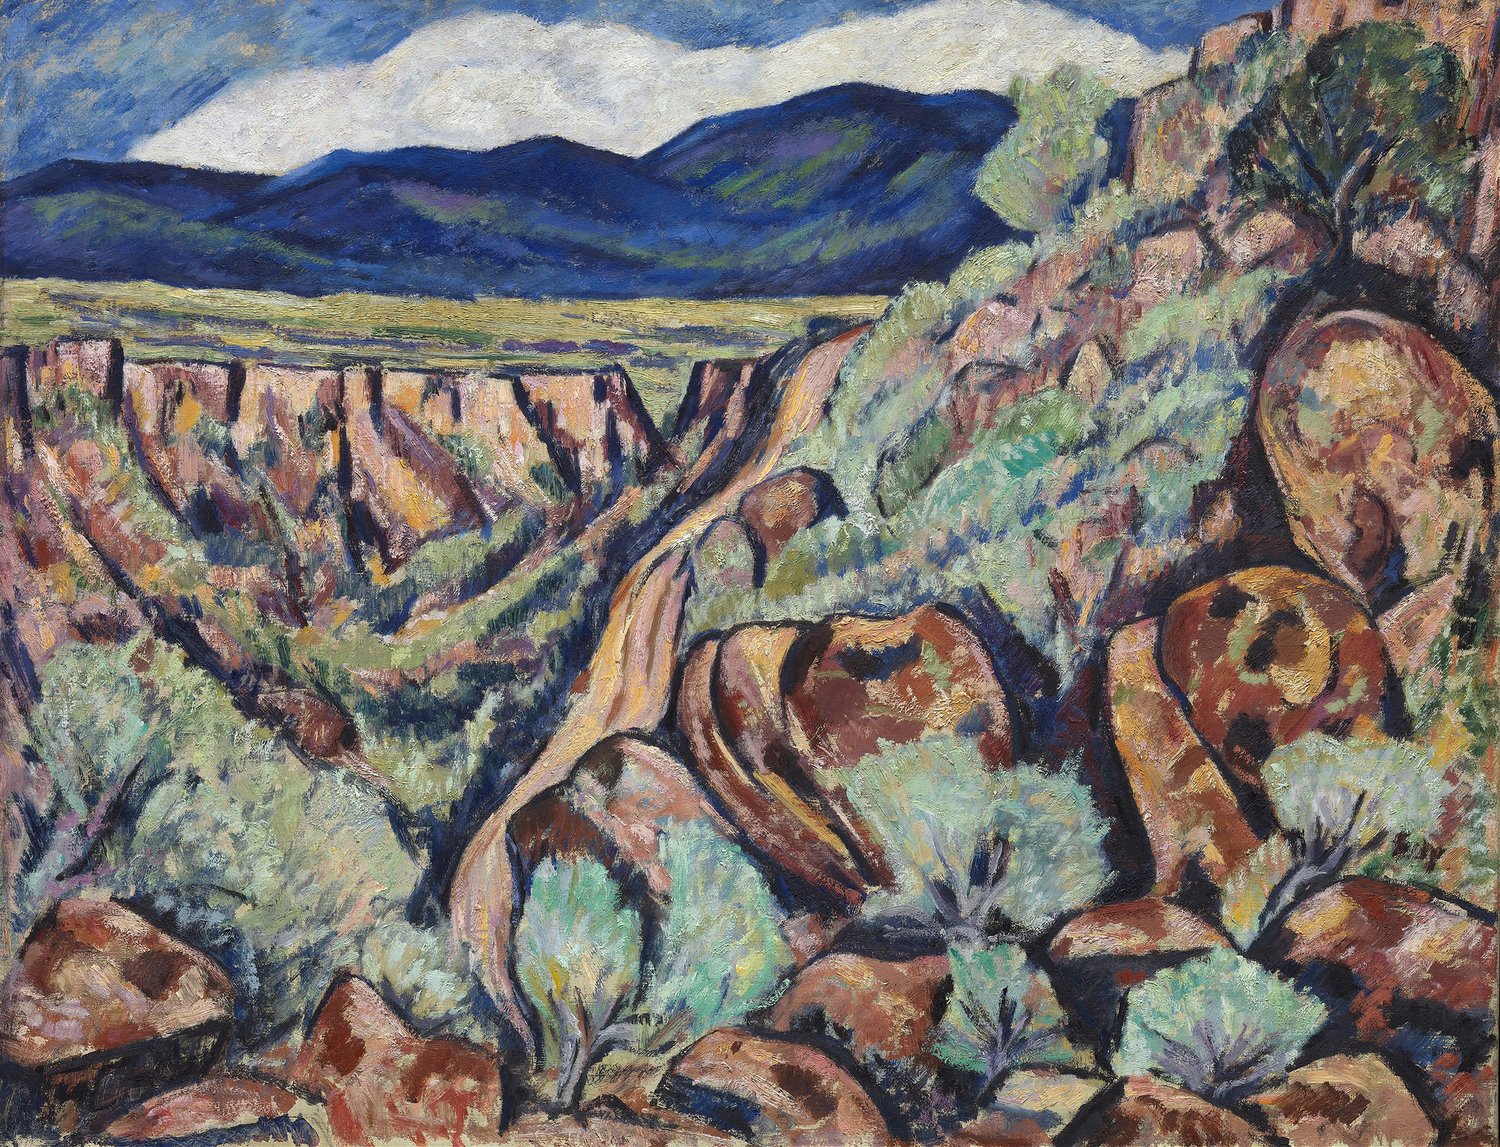 Landscape, New Mexico (1919 and 1920)